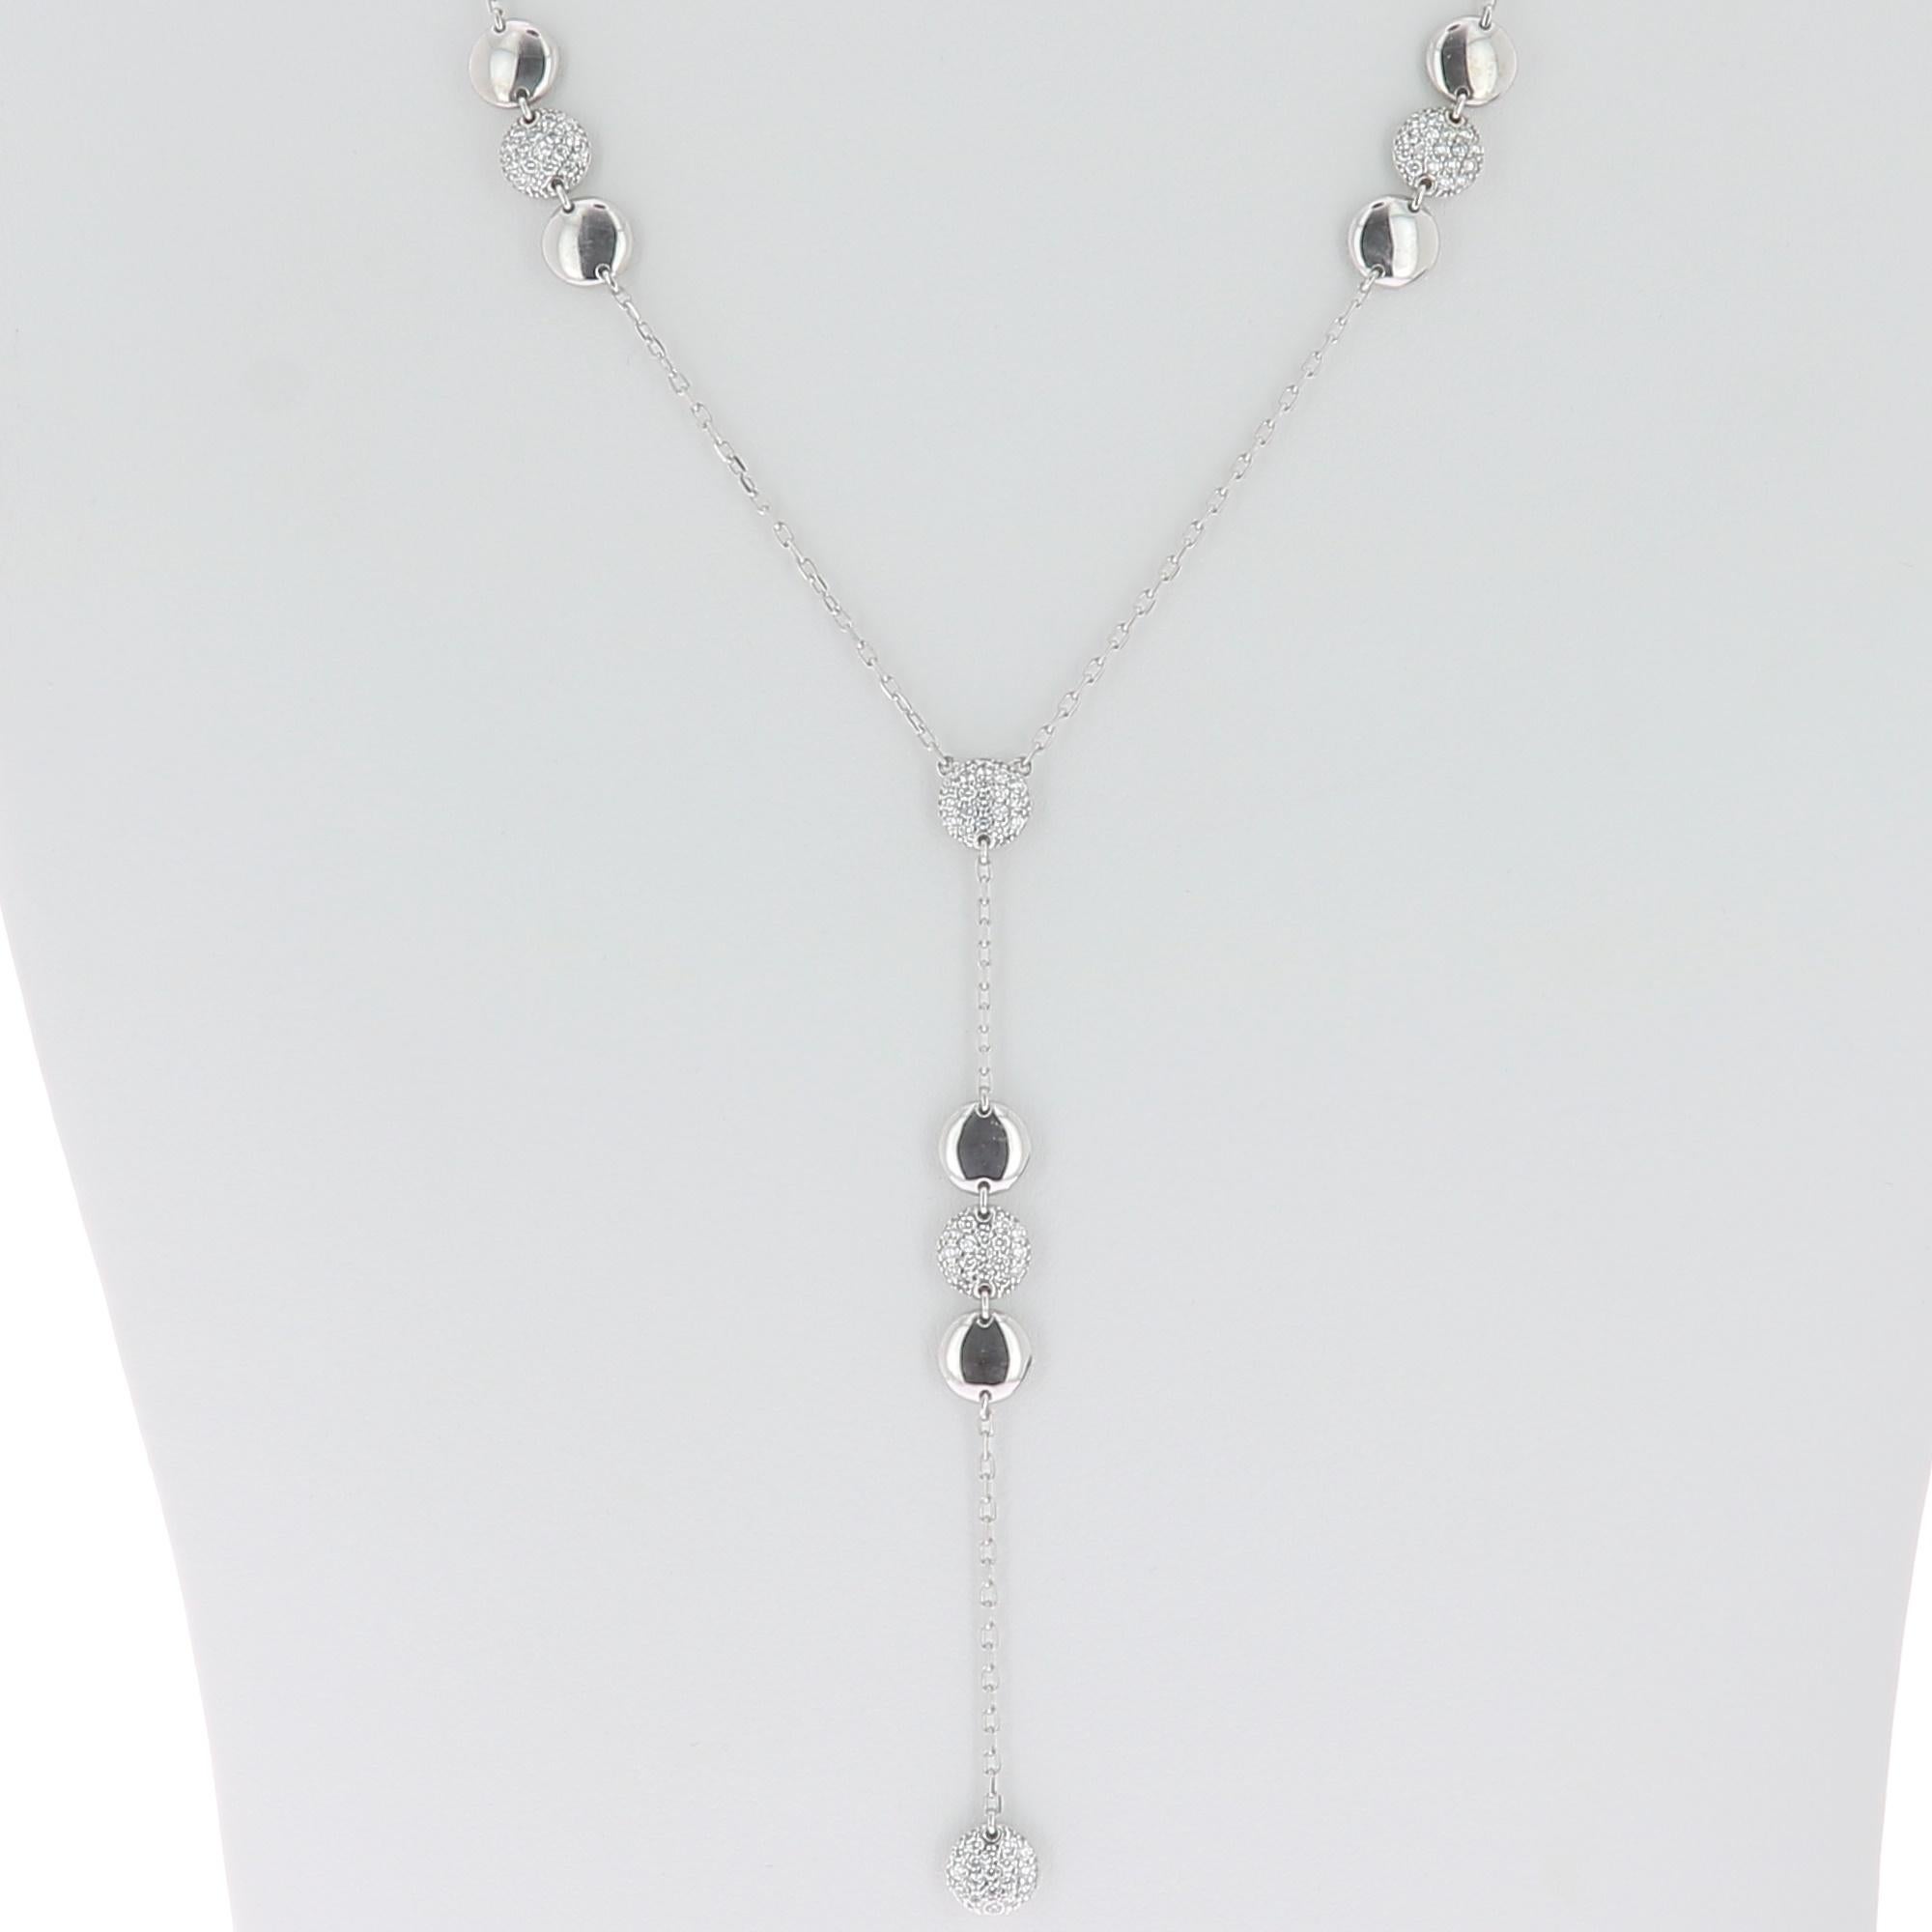 An amazing pendant necklace set with Round Diamonds weighing 0.75 Carats.
The diamonds are GVS grade. 
The Chain is 18K Yellow Gold. 
The Diamond Necklace weight 10.48 Grams(g).
The Necklace is also available in 18K White Gold, 18K Rose Gold.
